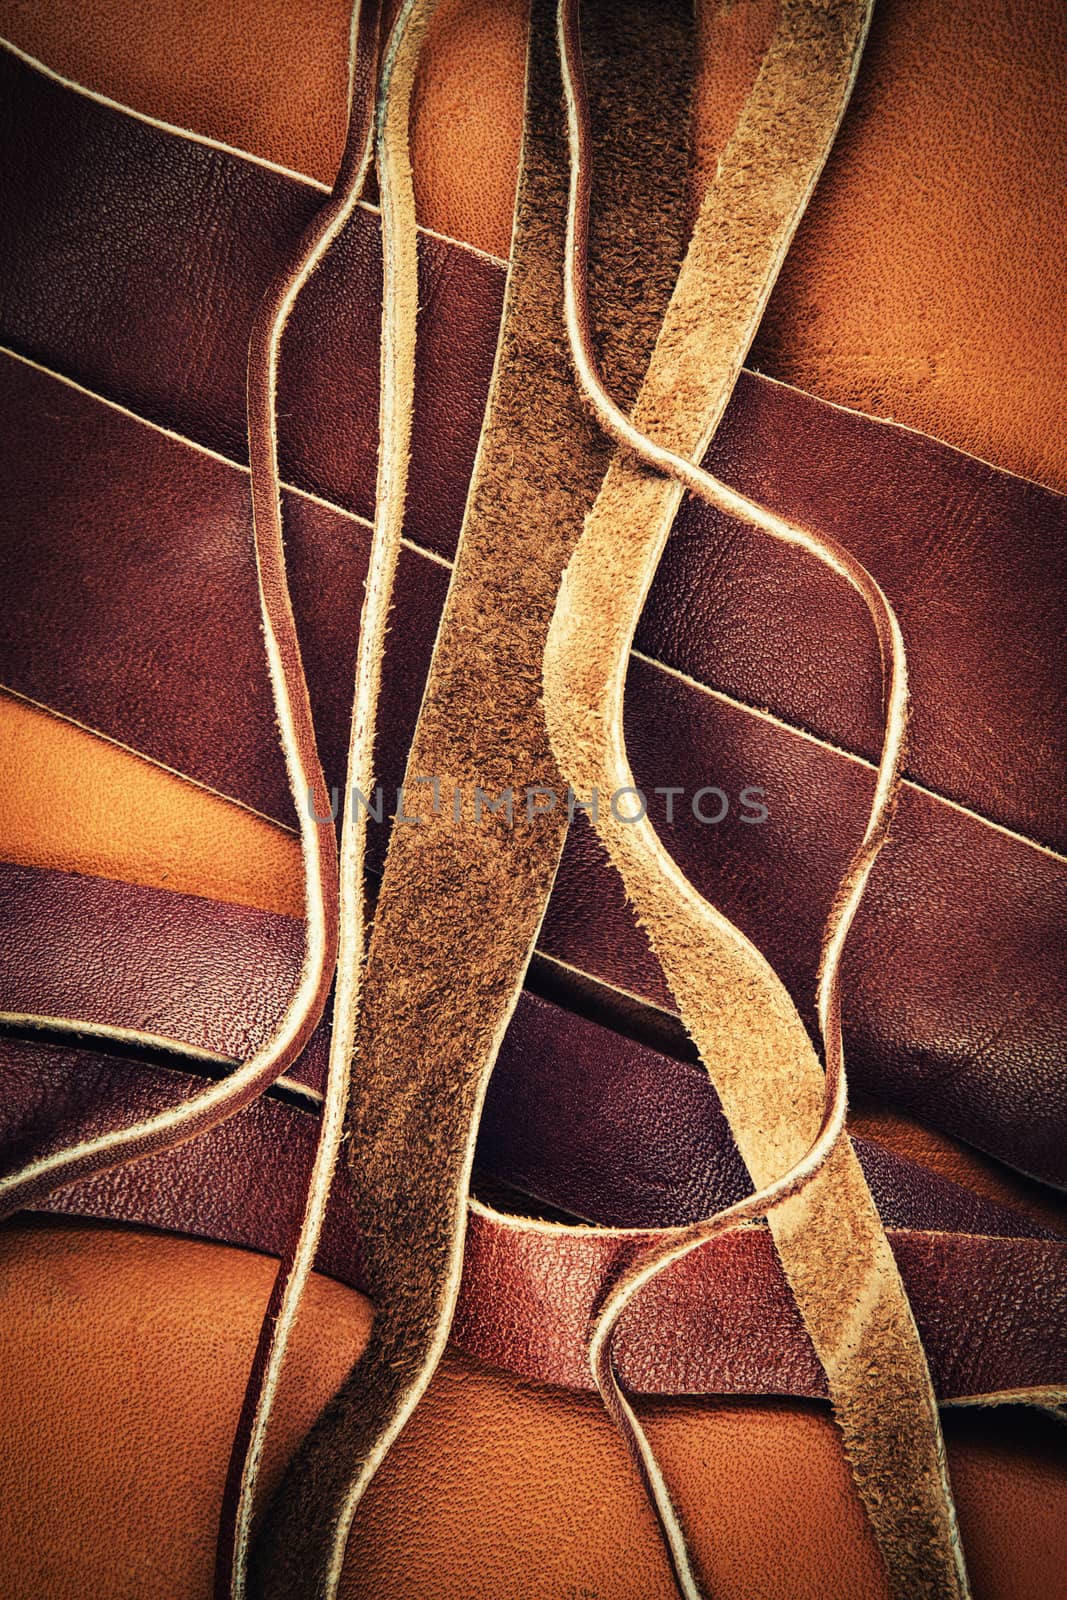 cut leather straps by Ahojdoma